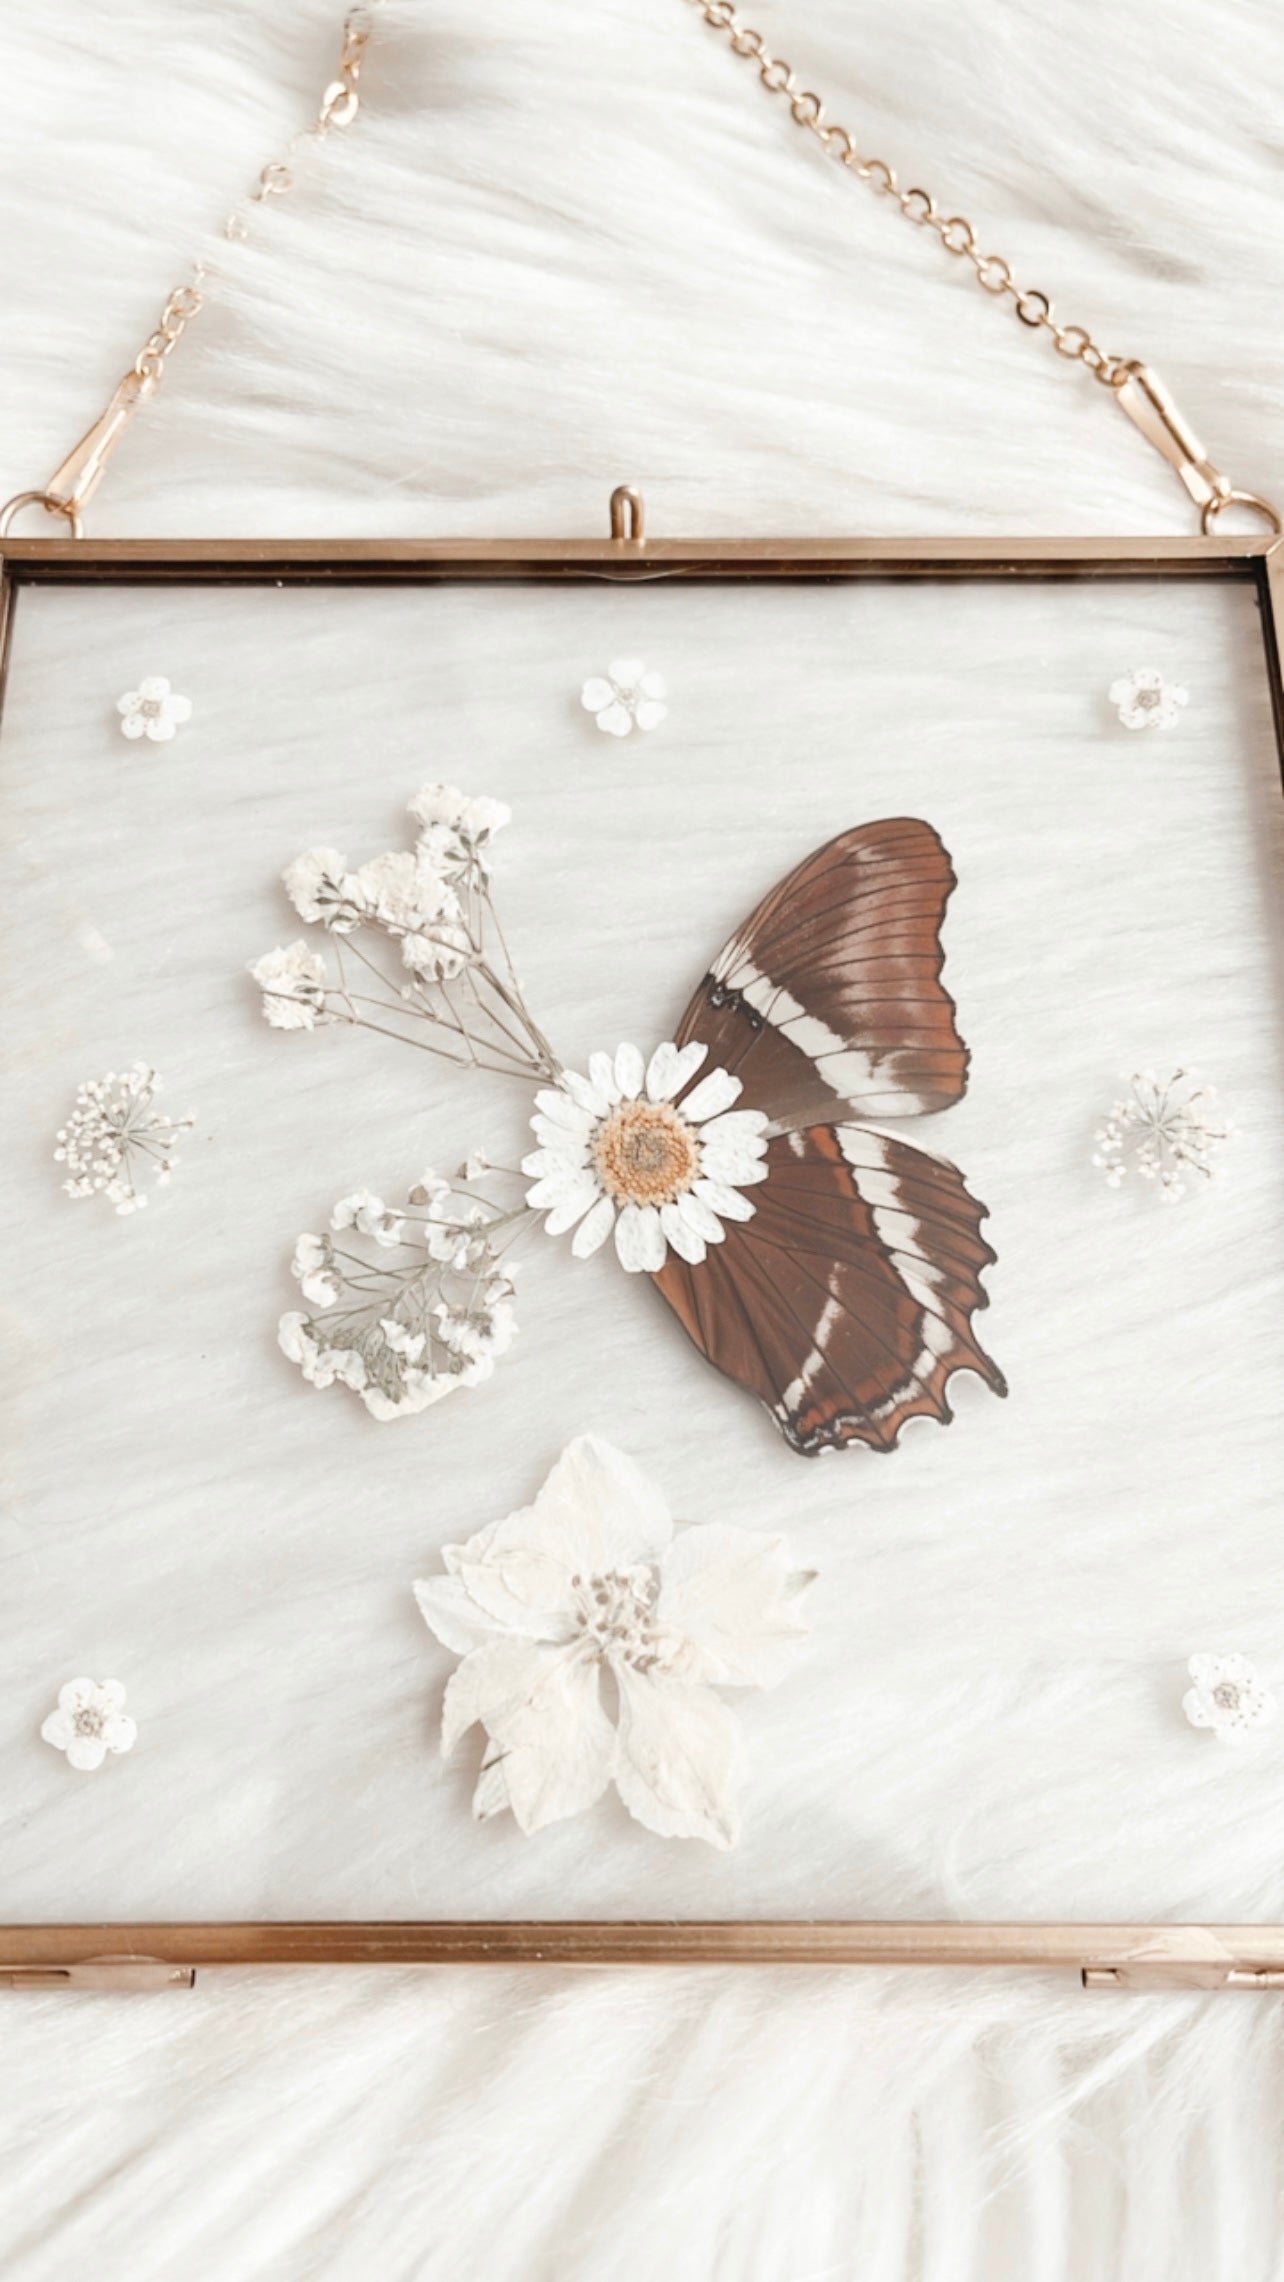 Amber Butterfly Floral Frame